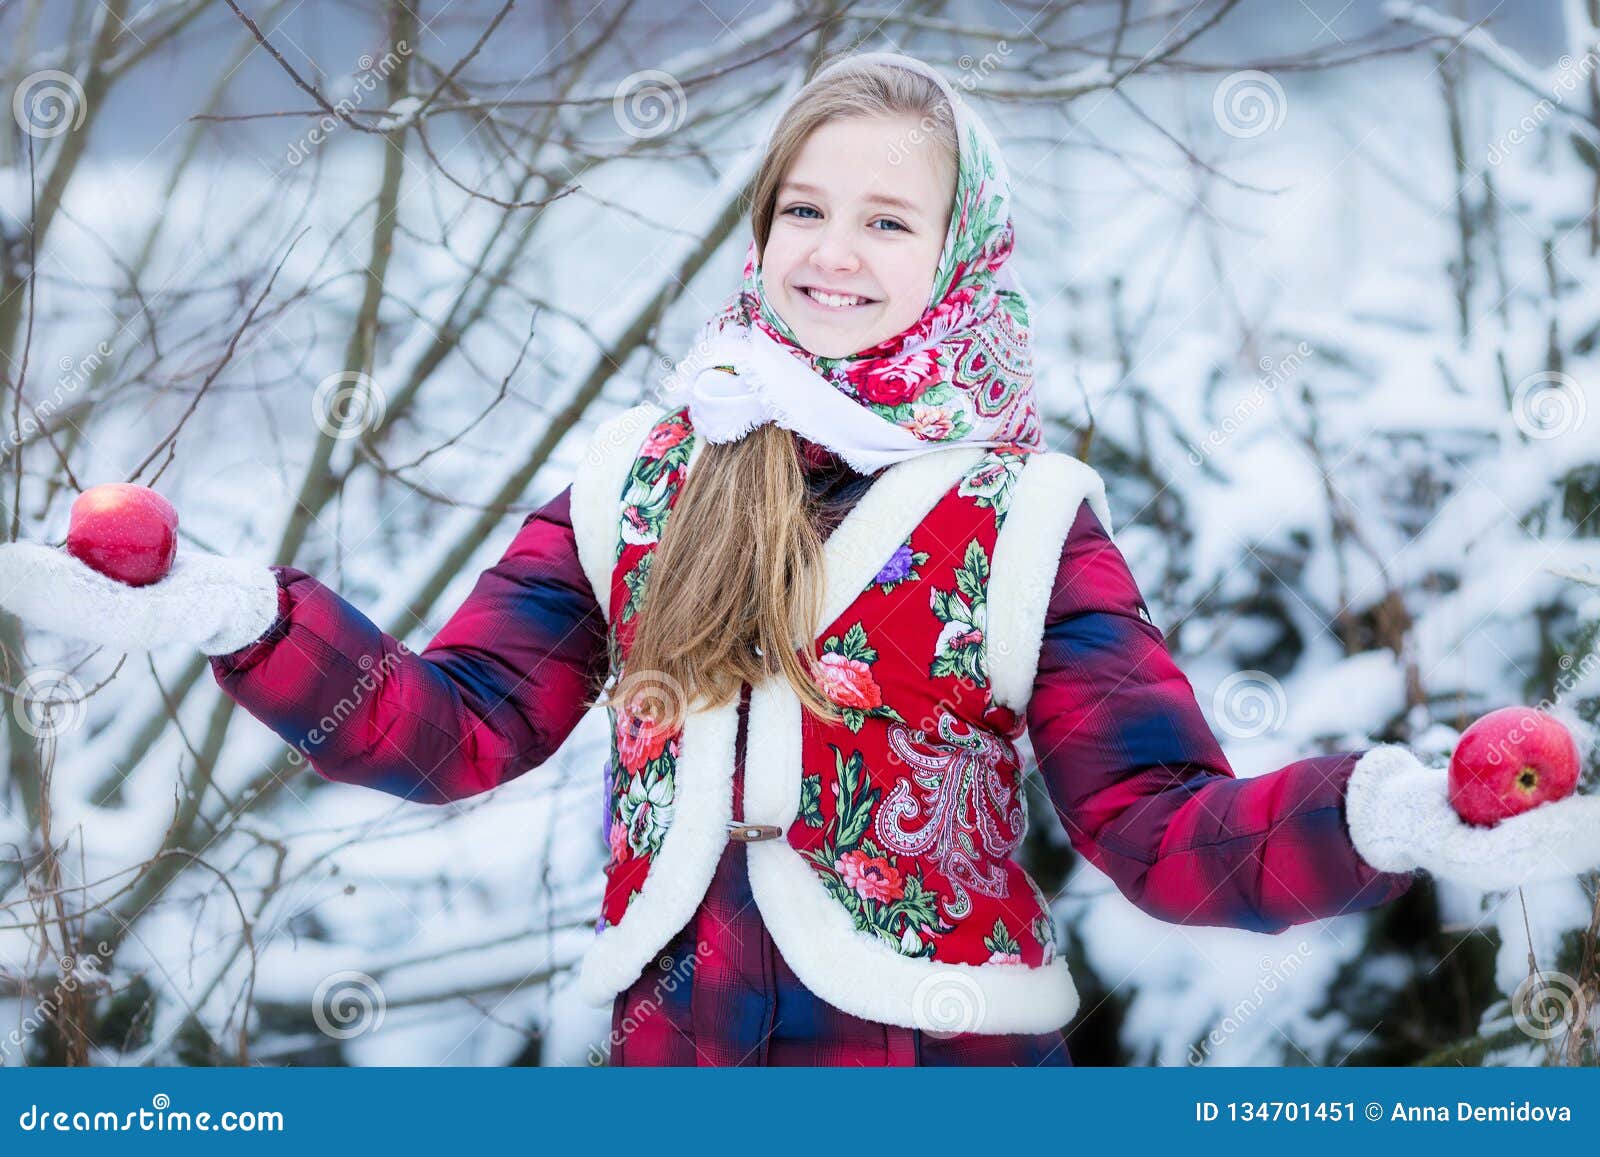 Beautiful Teen Girl In Russian National Clothes With Red Apples In Winter Hands Stock Image